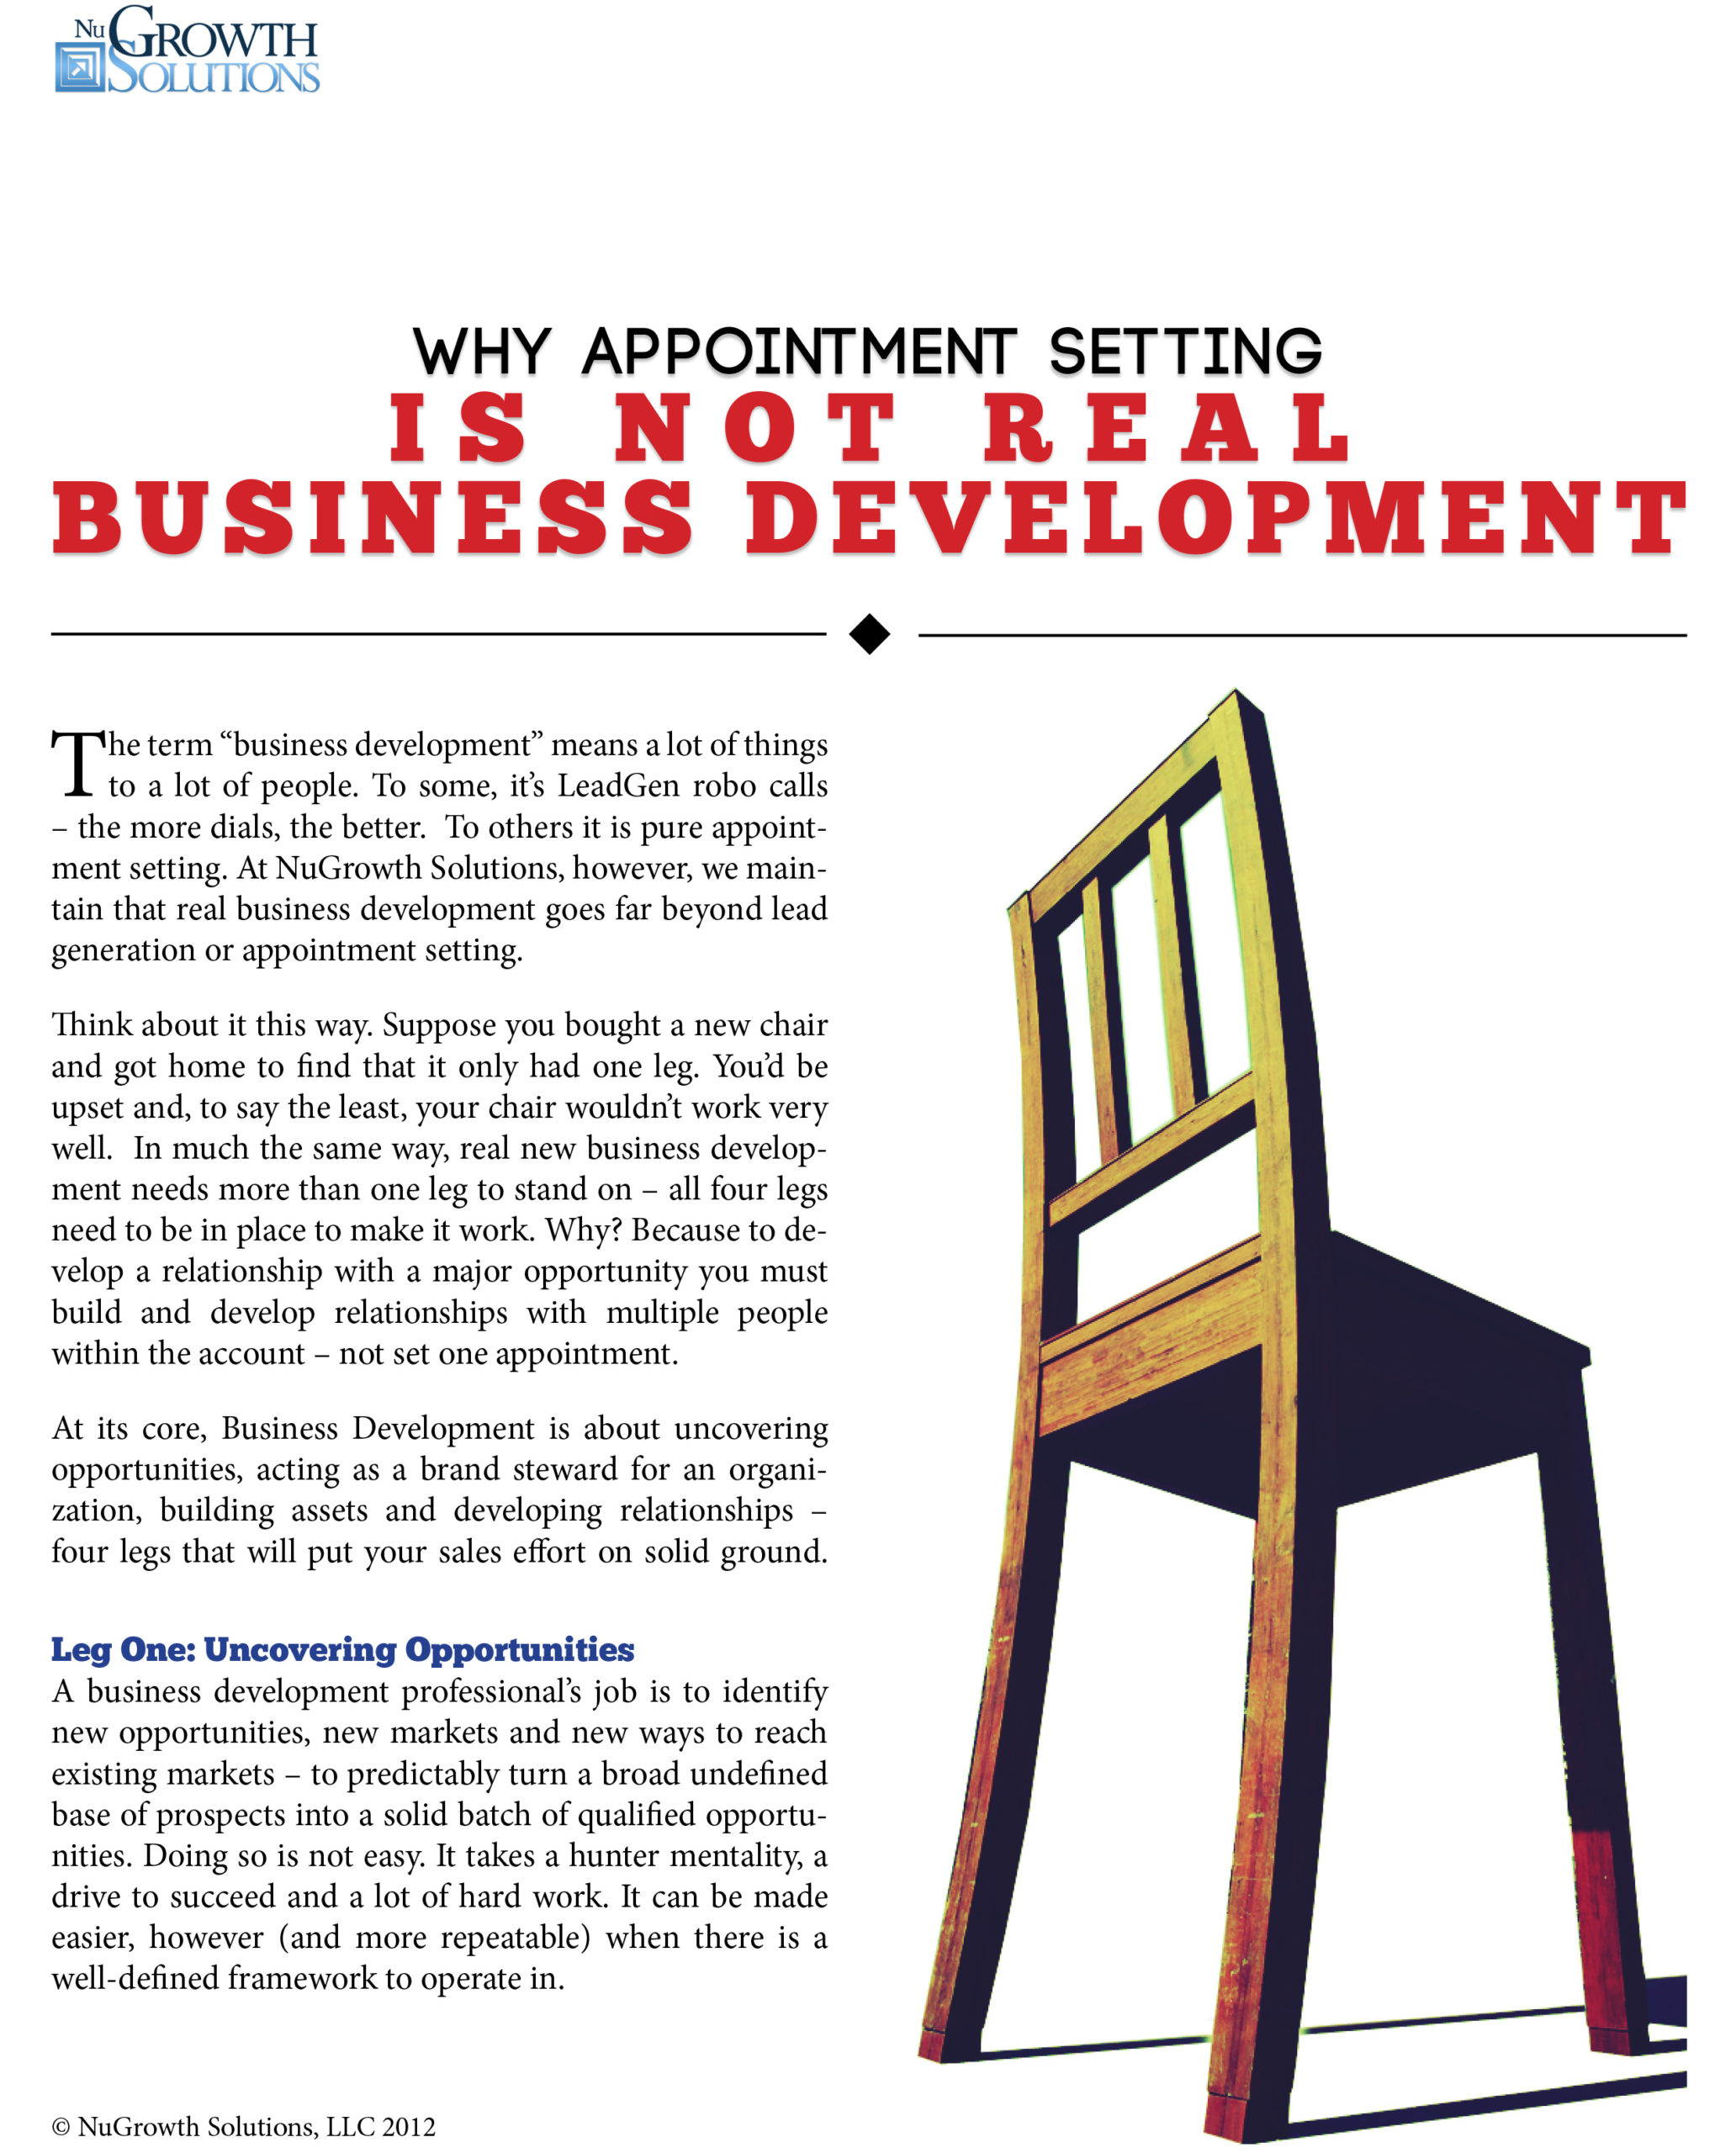 Why-Appointment-Setting-is-Not-Real-Business-Development-1